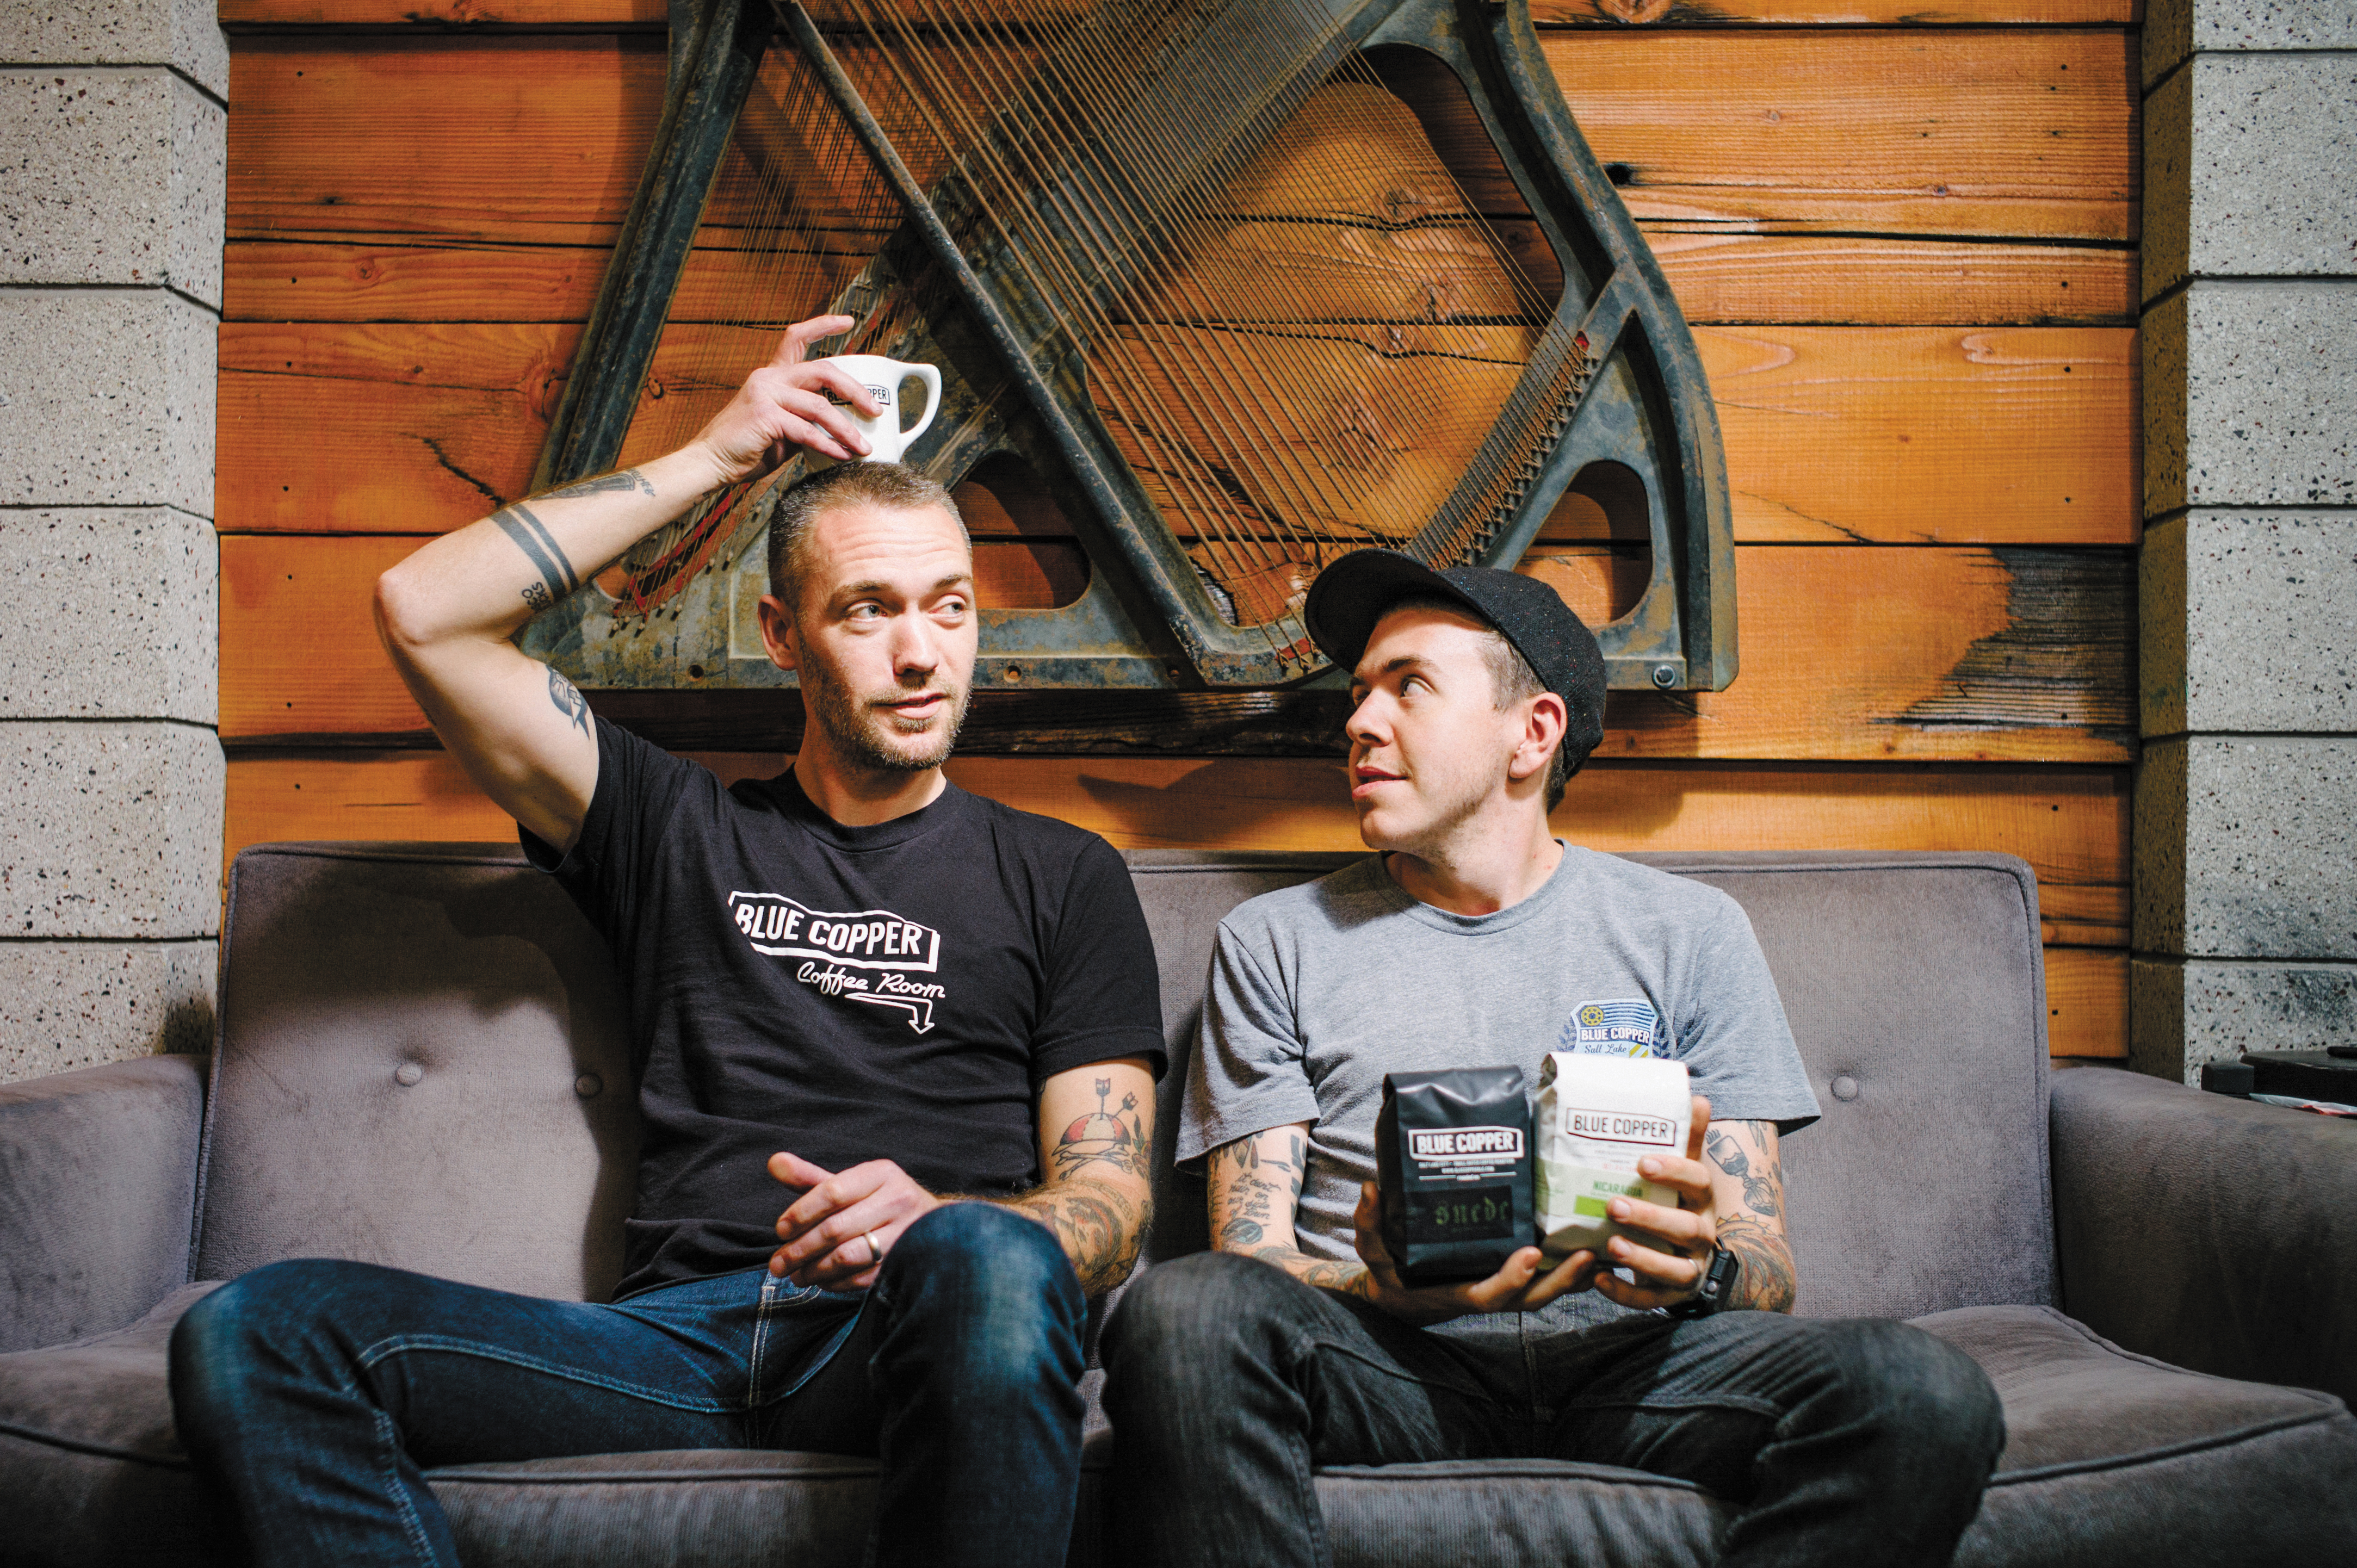 (L–R) Manager WIlliam Lapthorne and Roaster Patrick Andrews have solidified their proprietary roasts as the sole coffees offered at Blue Copper Coffee Room.